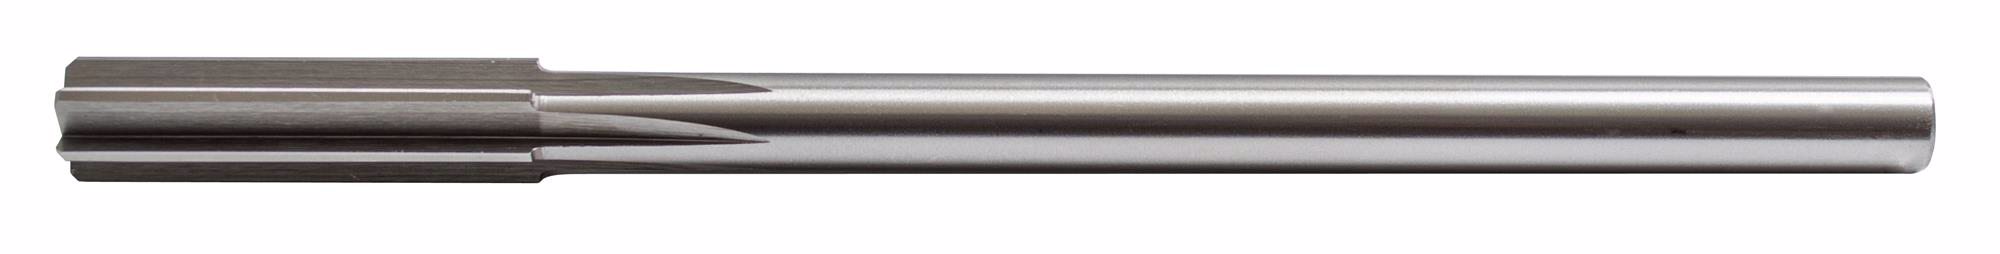 Uncoated Bright Alvord Polk 401 High-Speed Steel Counterbore Finish 8mm Size Built-In Pilot 